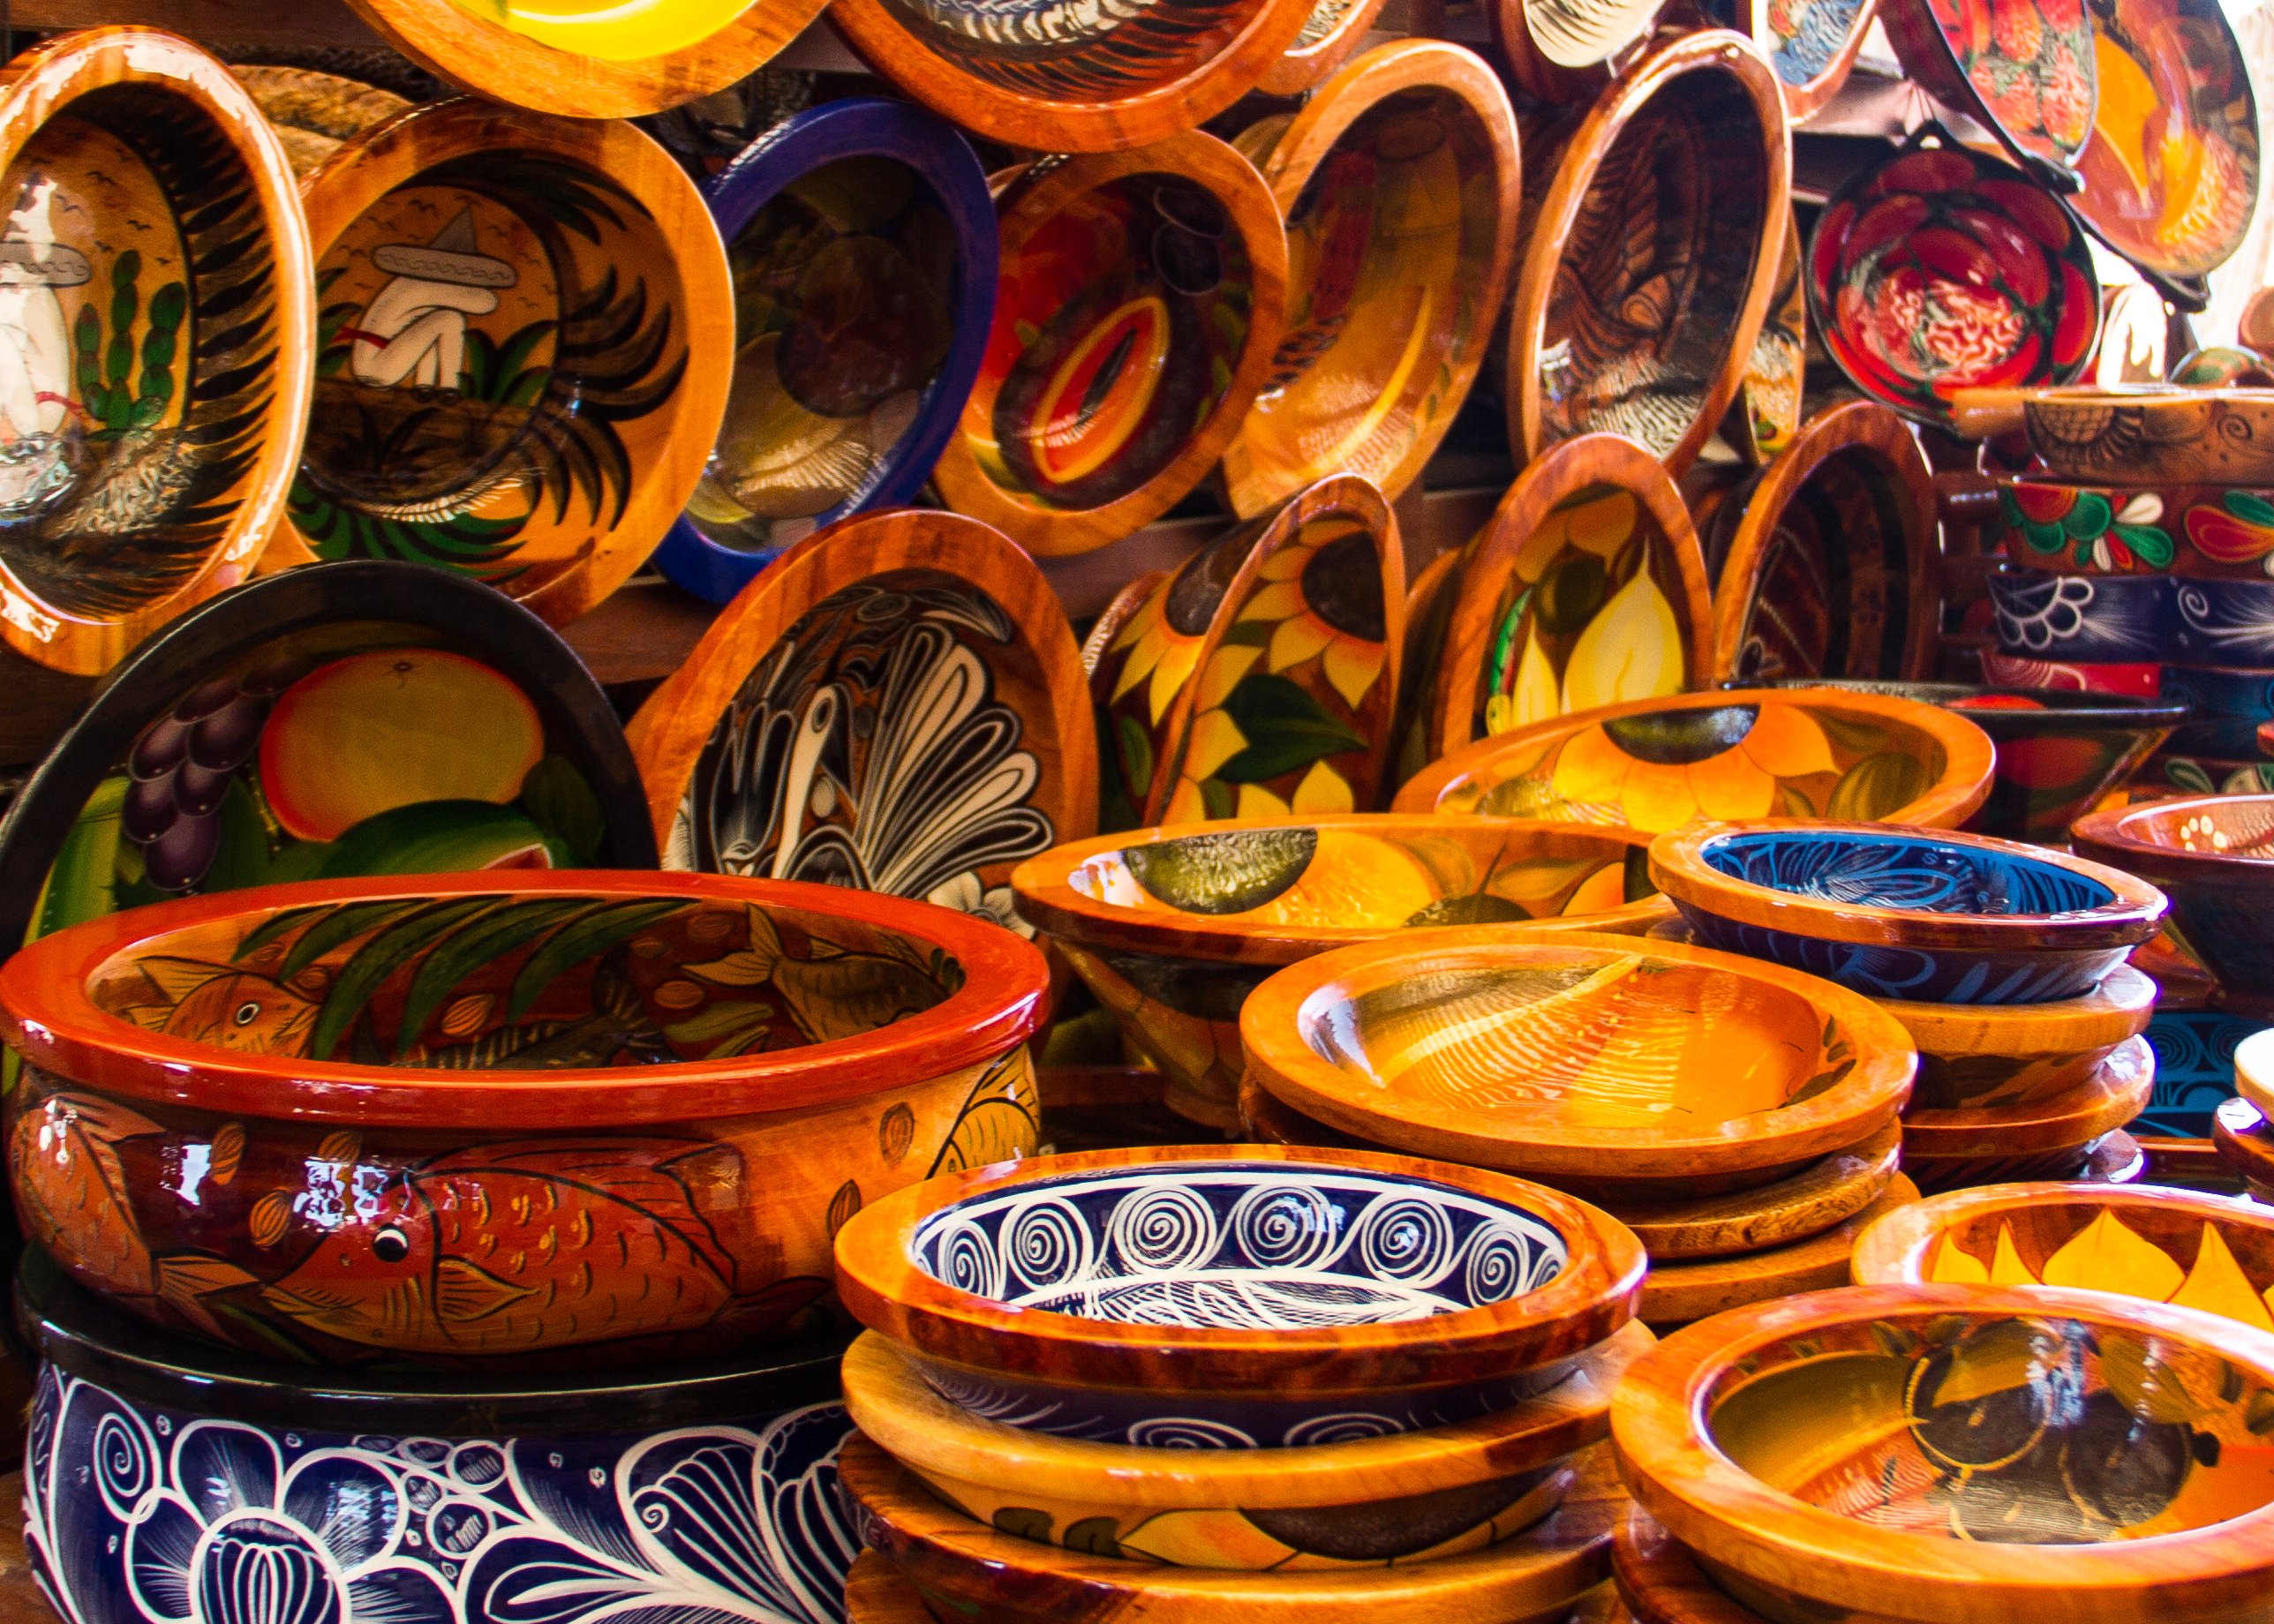 Hand made pottery being offered for sale